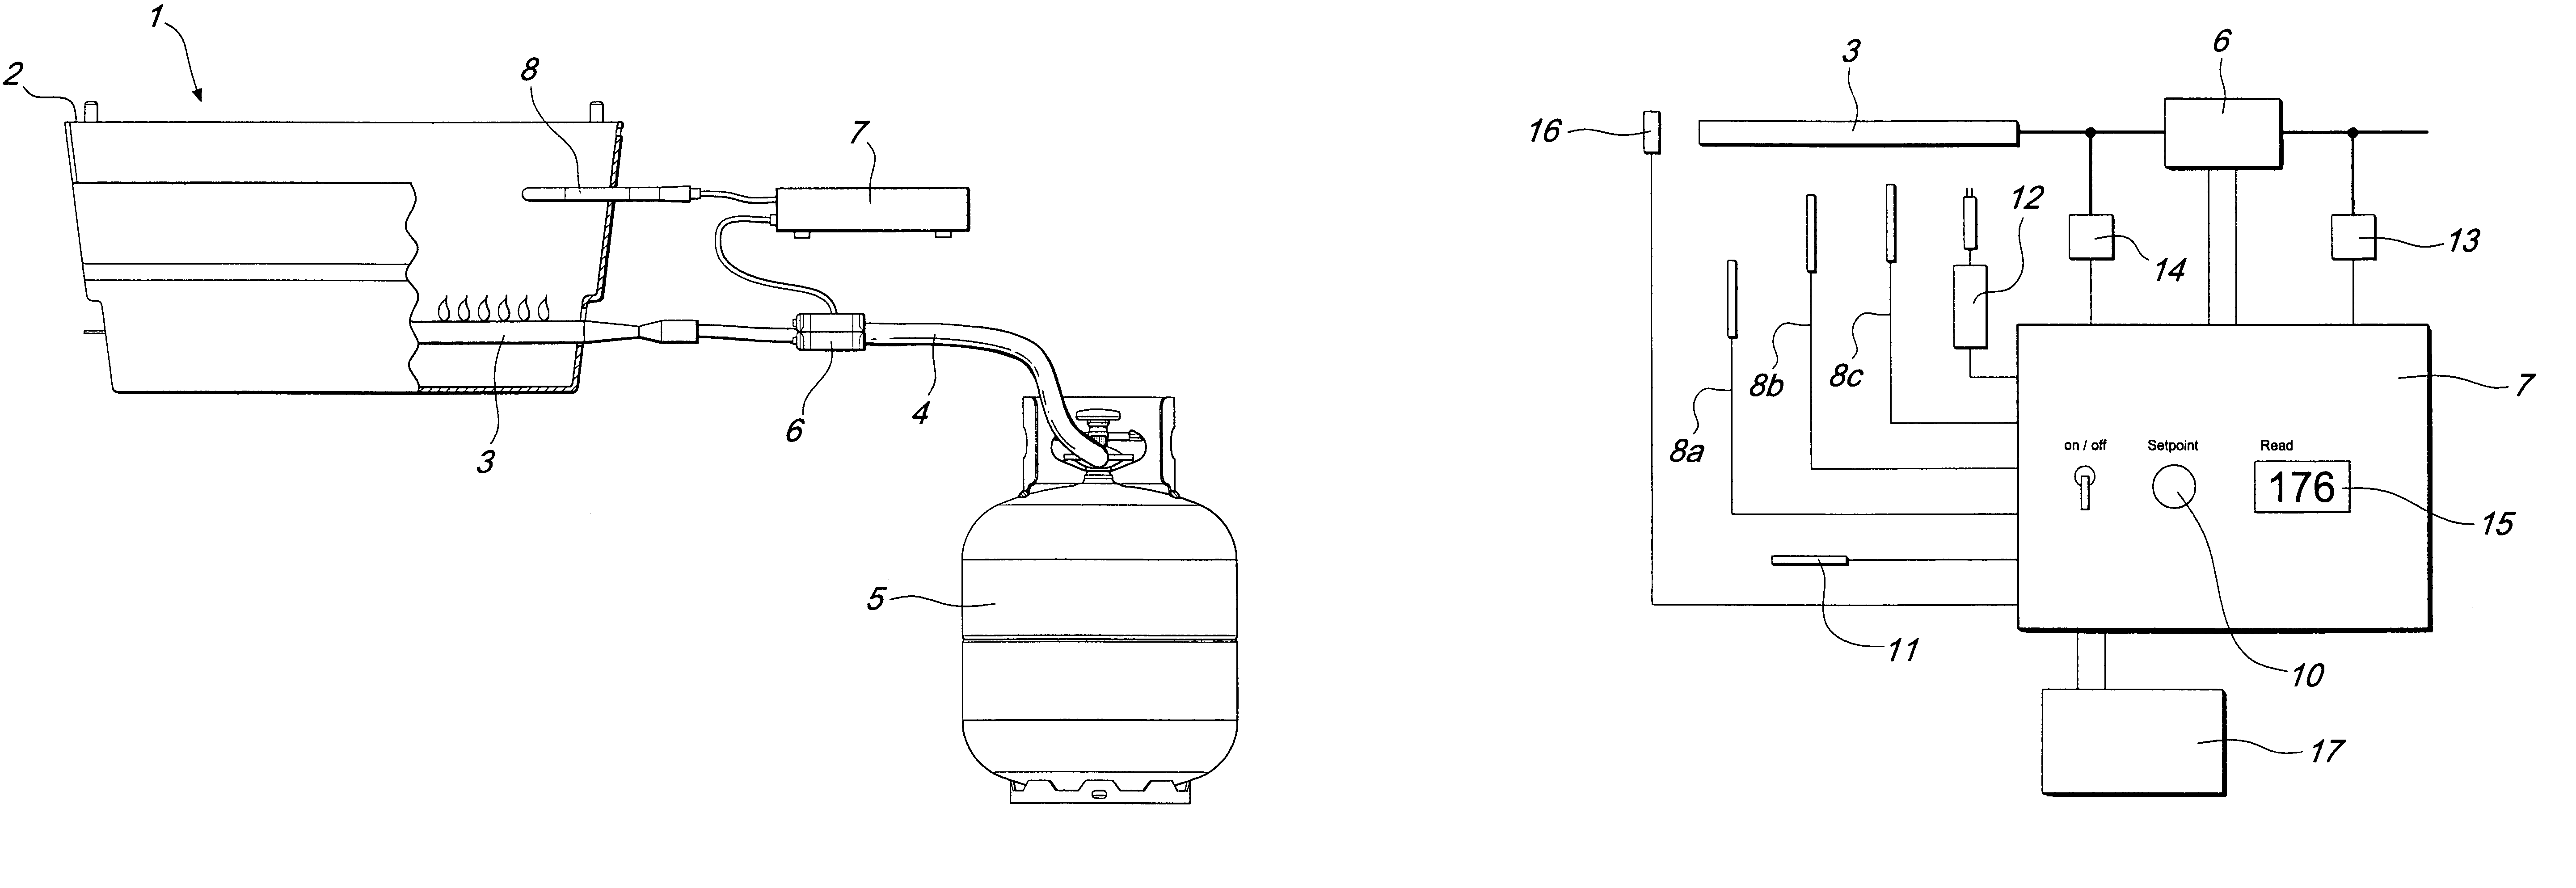 Gas-fired cooking apparatus with control of cooking temperature